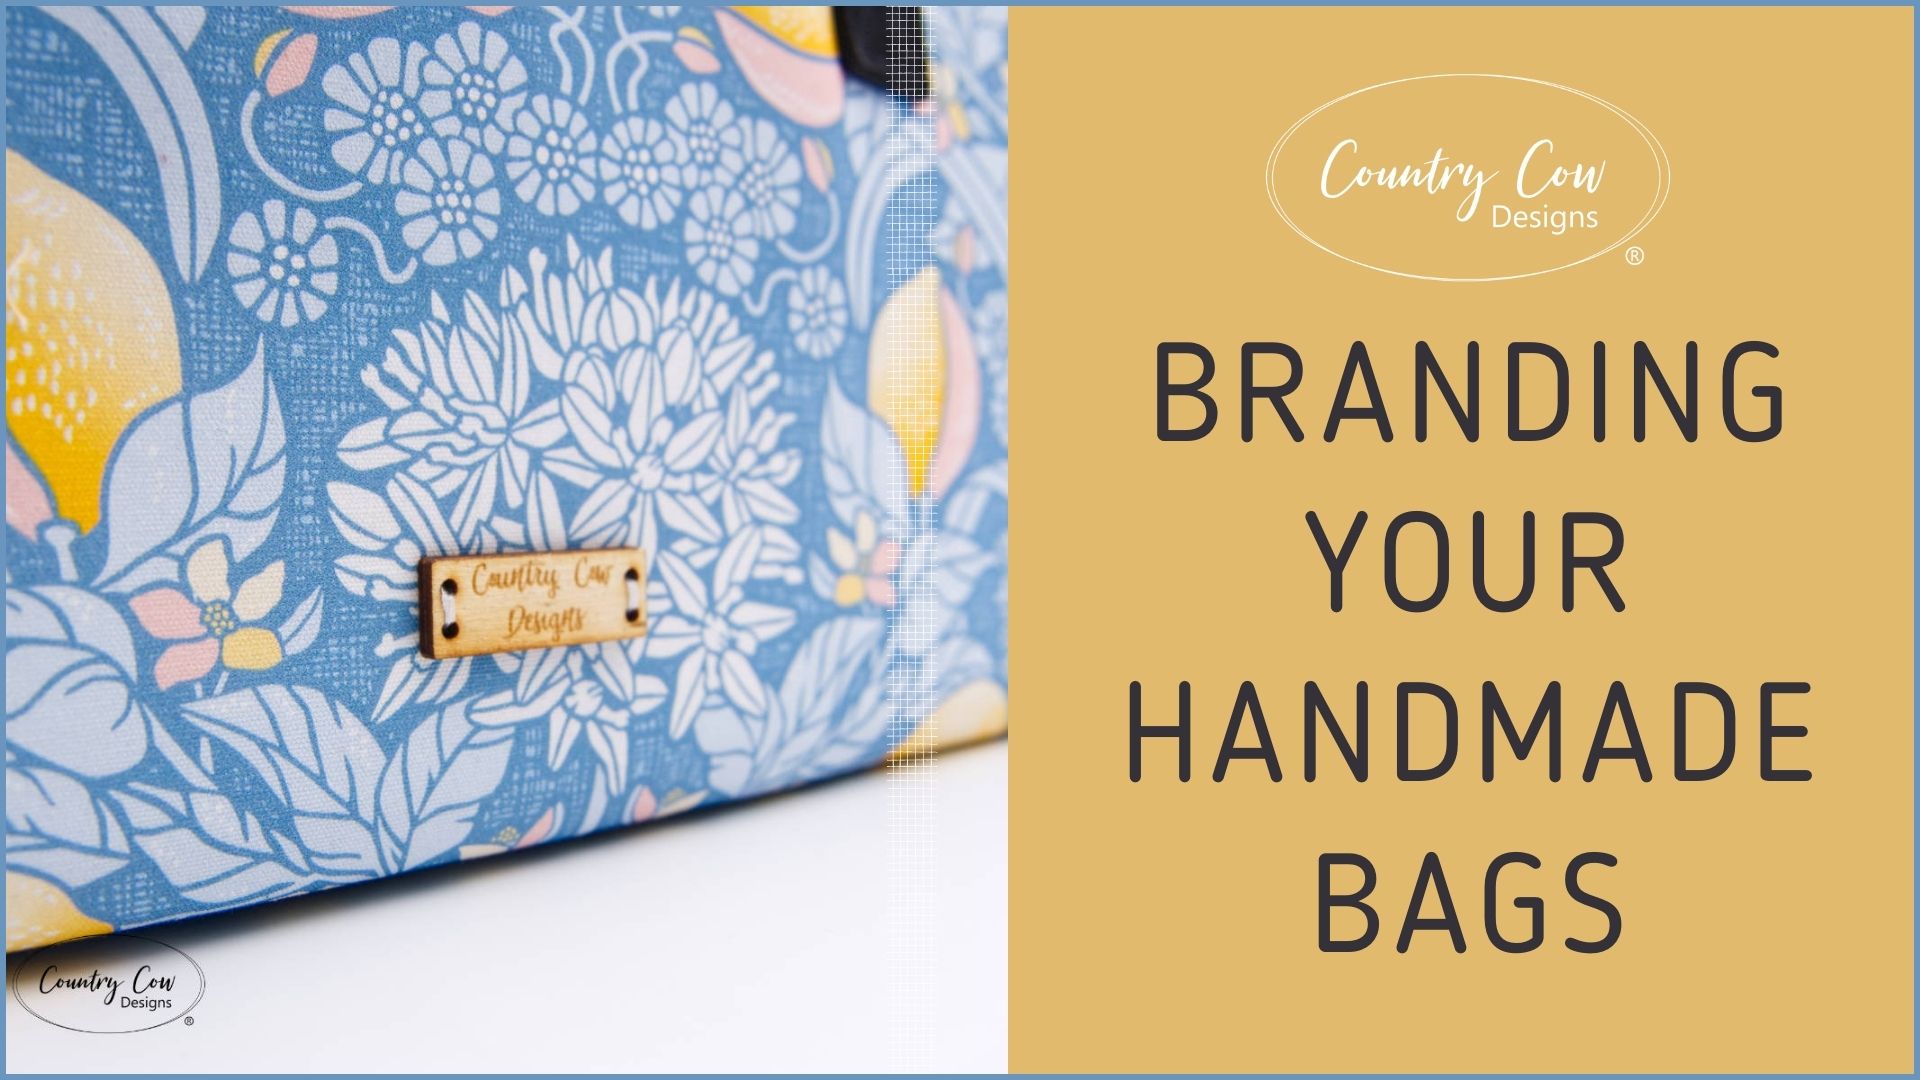 How to brand your handmade bags